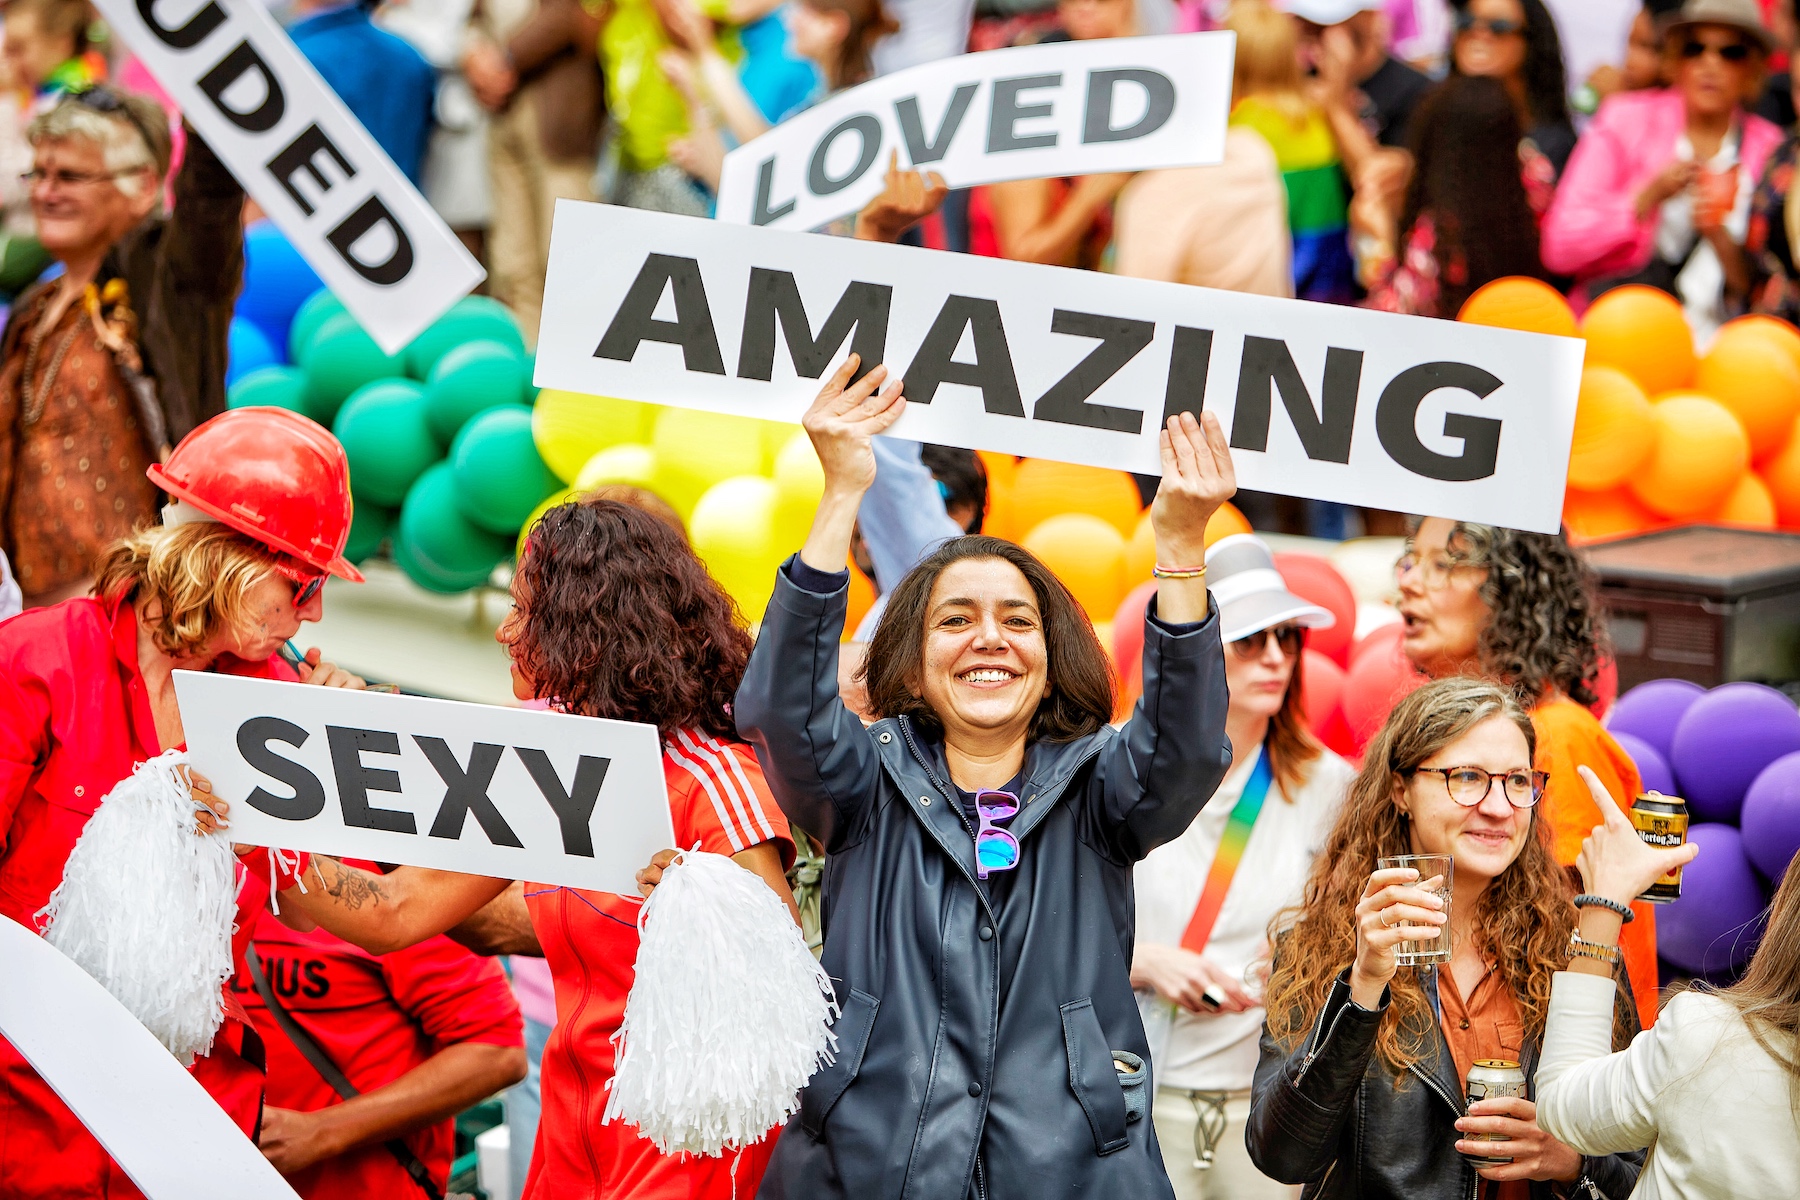 A woman holds a sign that says, "Amazing". Around her people hold other signs that read, "Sexy" and "Loved".